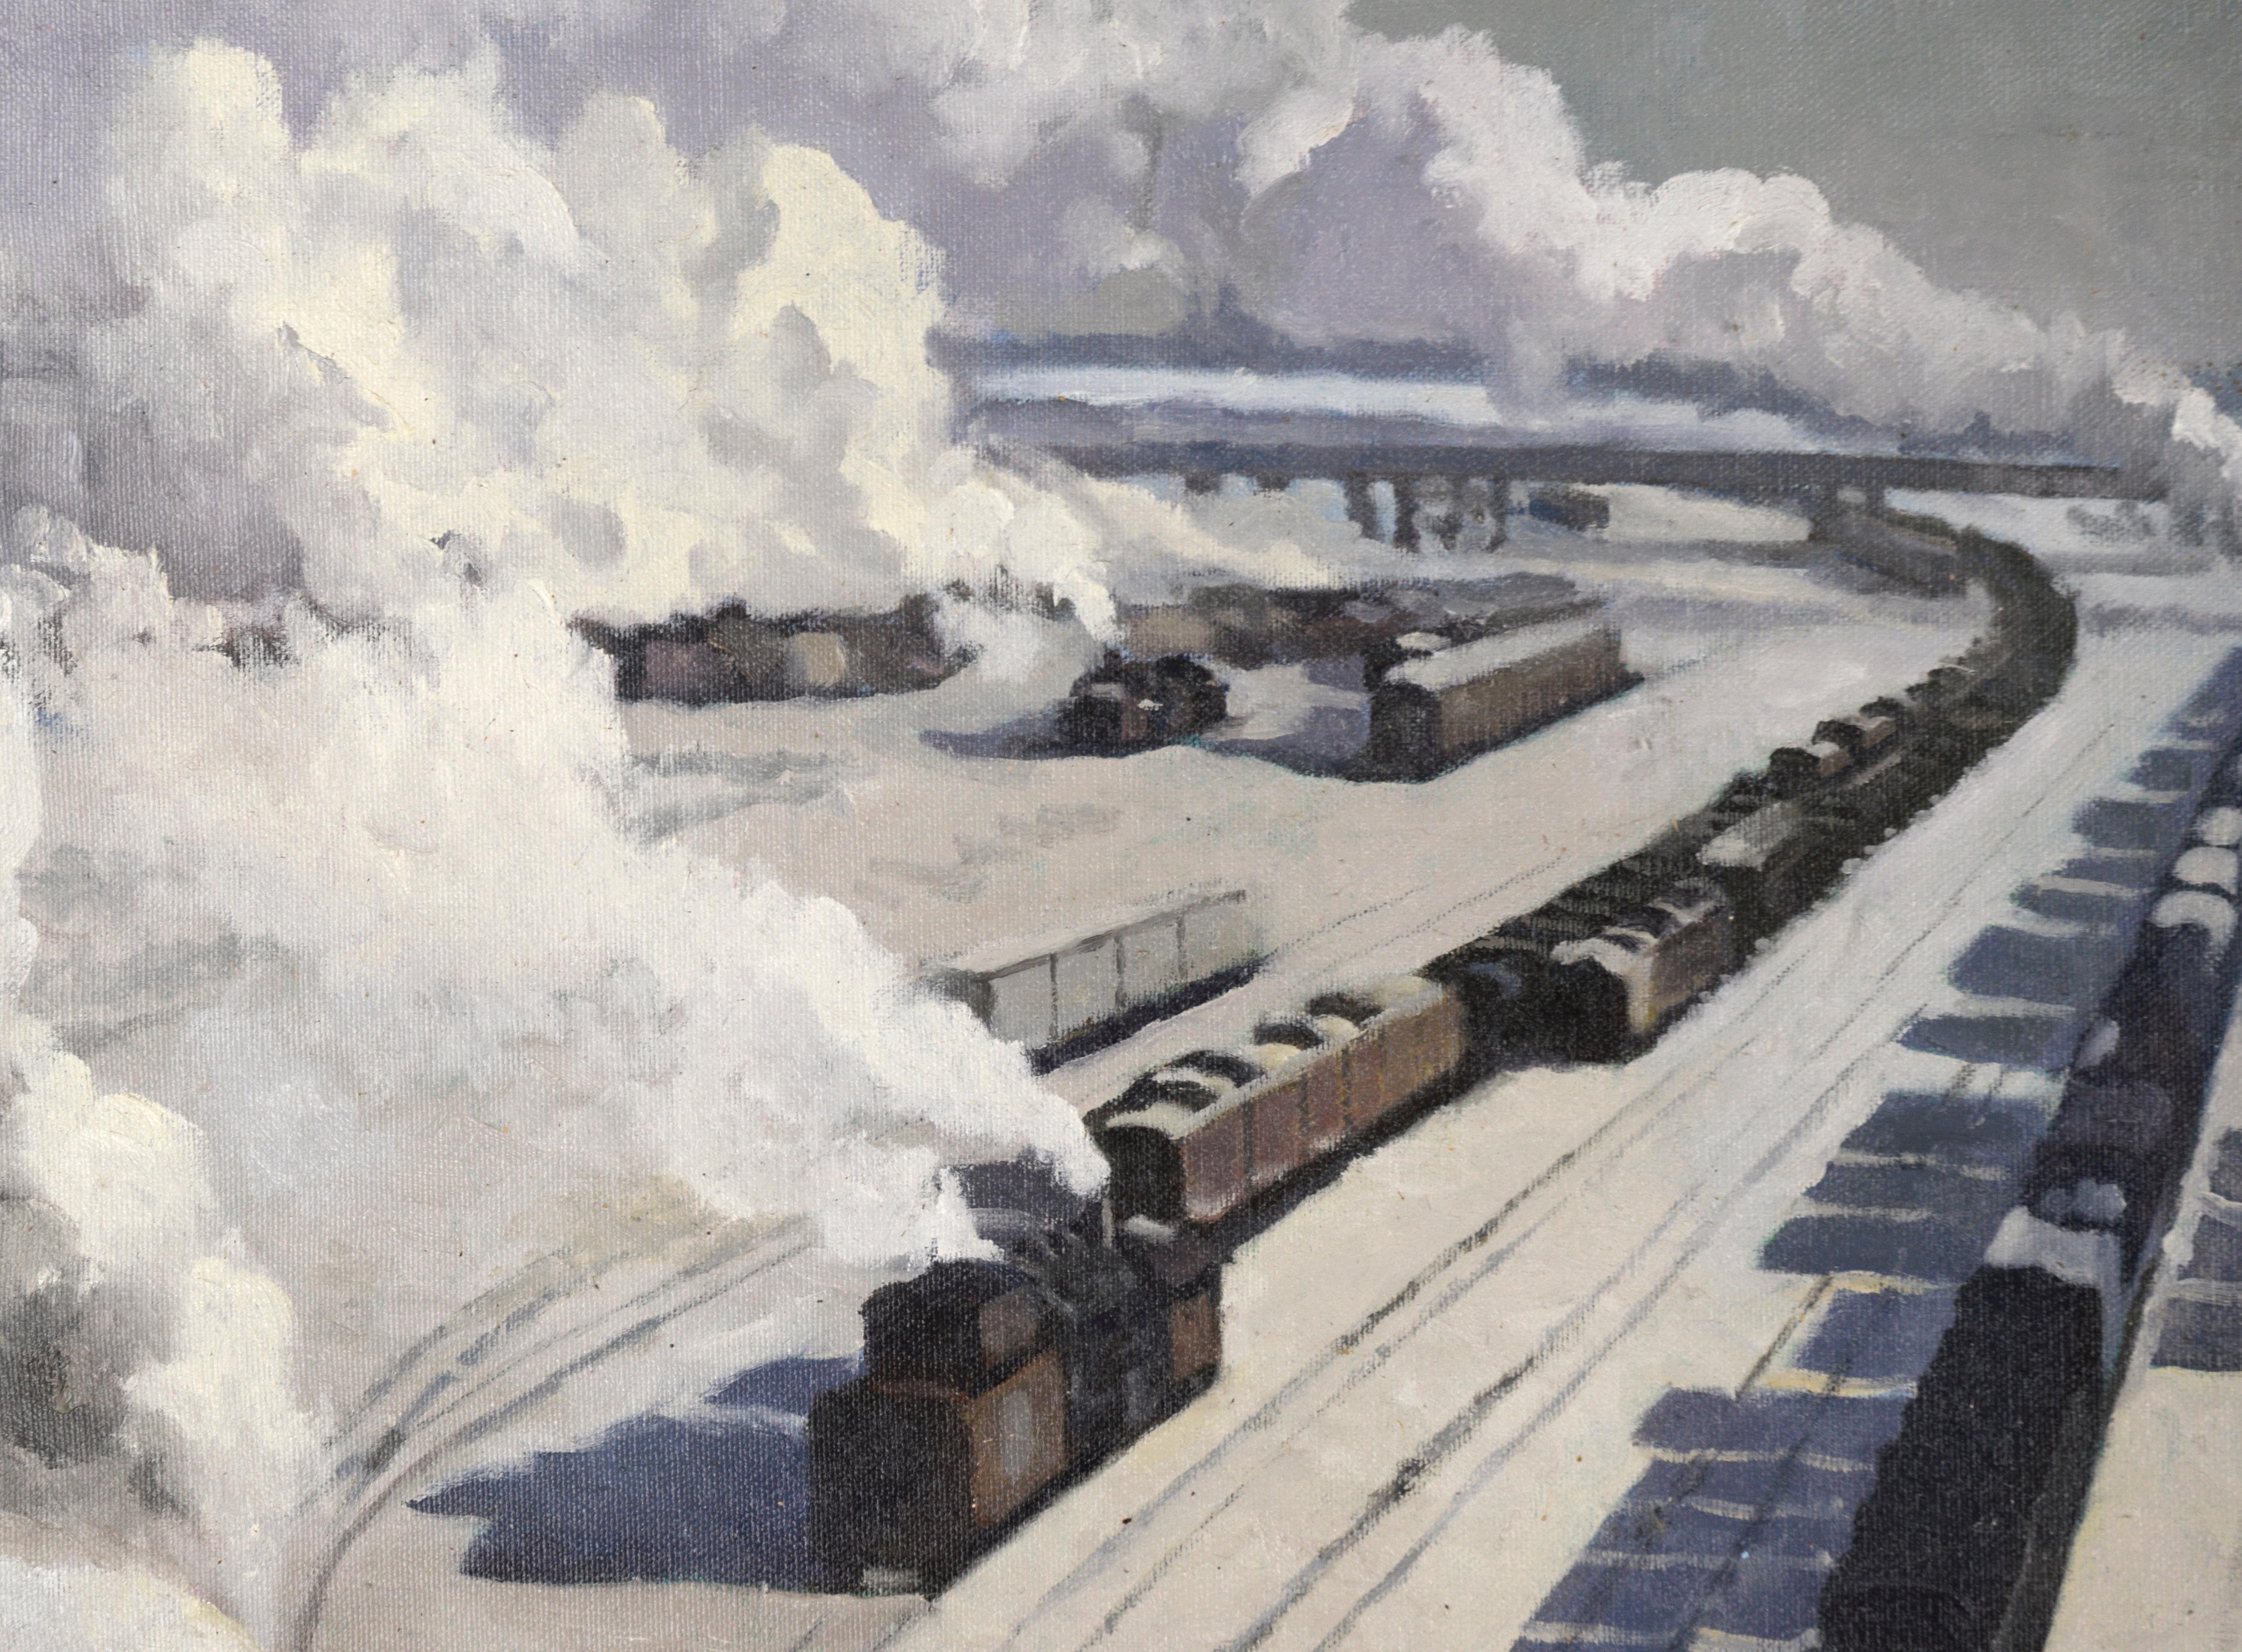 Train Station in Winter - Industrial Landscape - Painting by Wayne Weberbauer